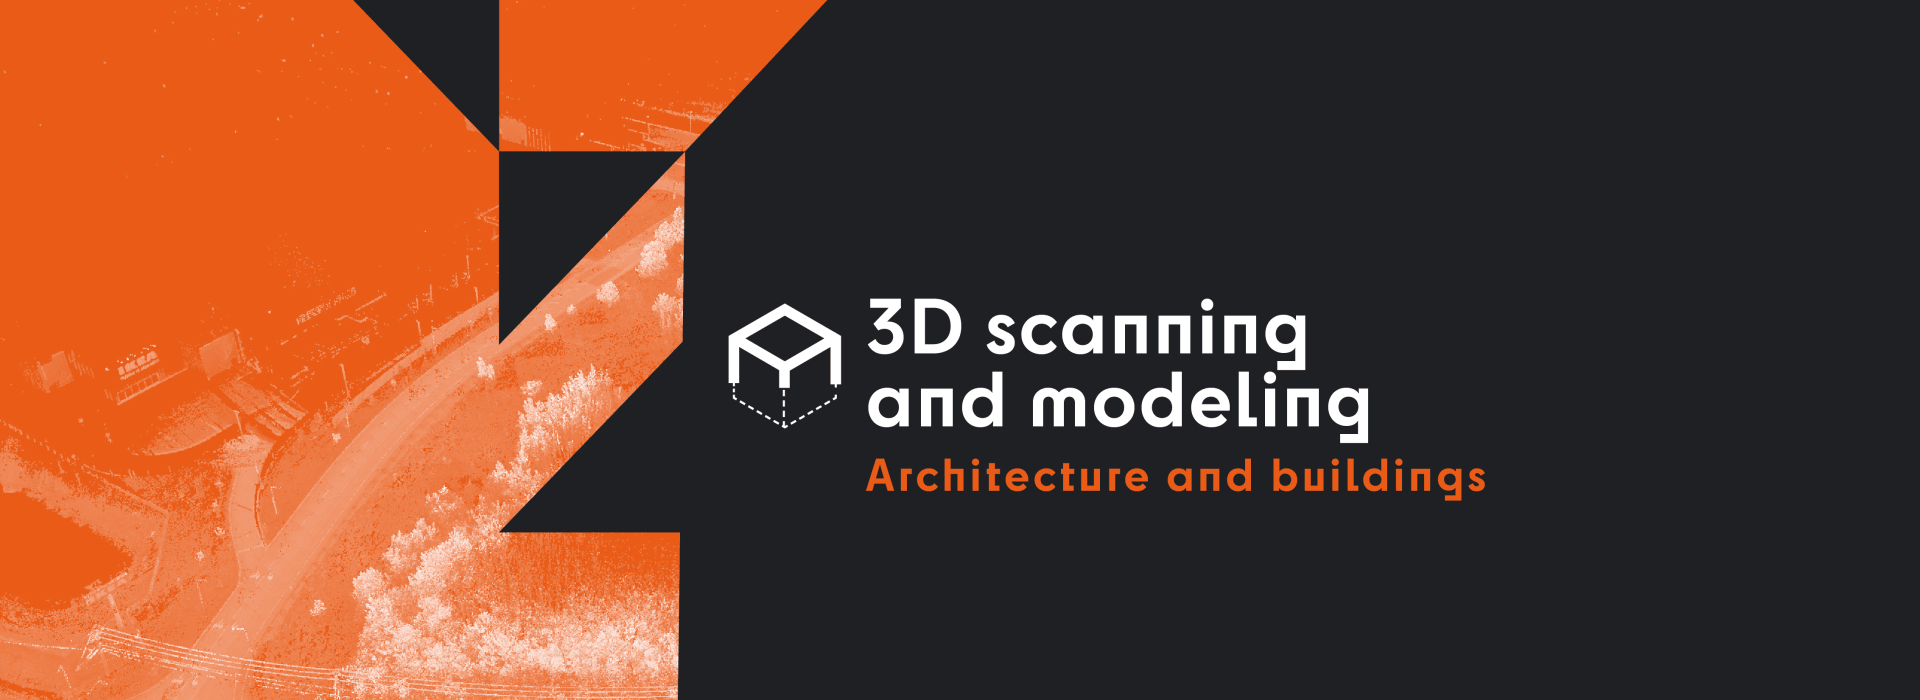 ANGLAIS_WebBanner_3D scanning - Archit and build